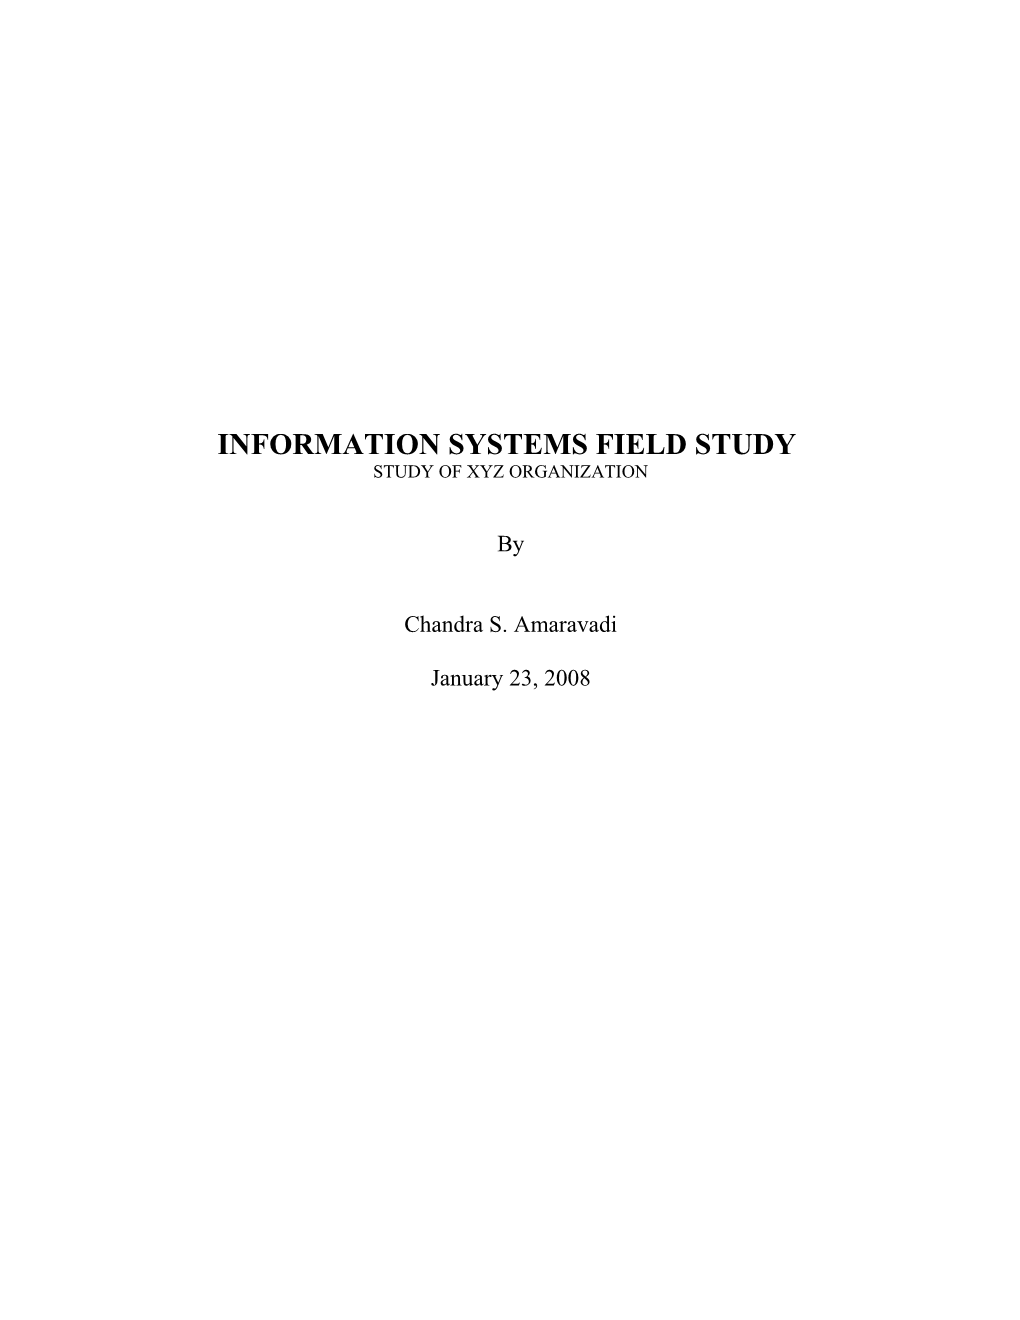 Information Systems Field Study